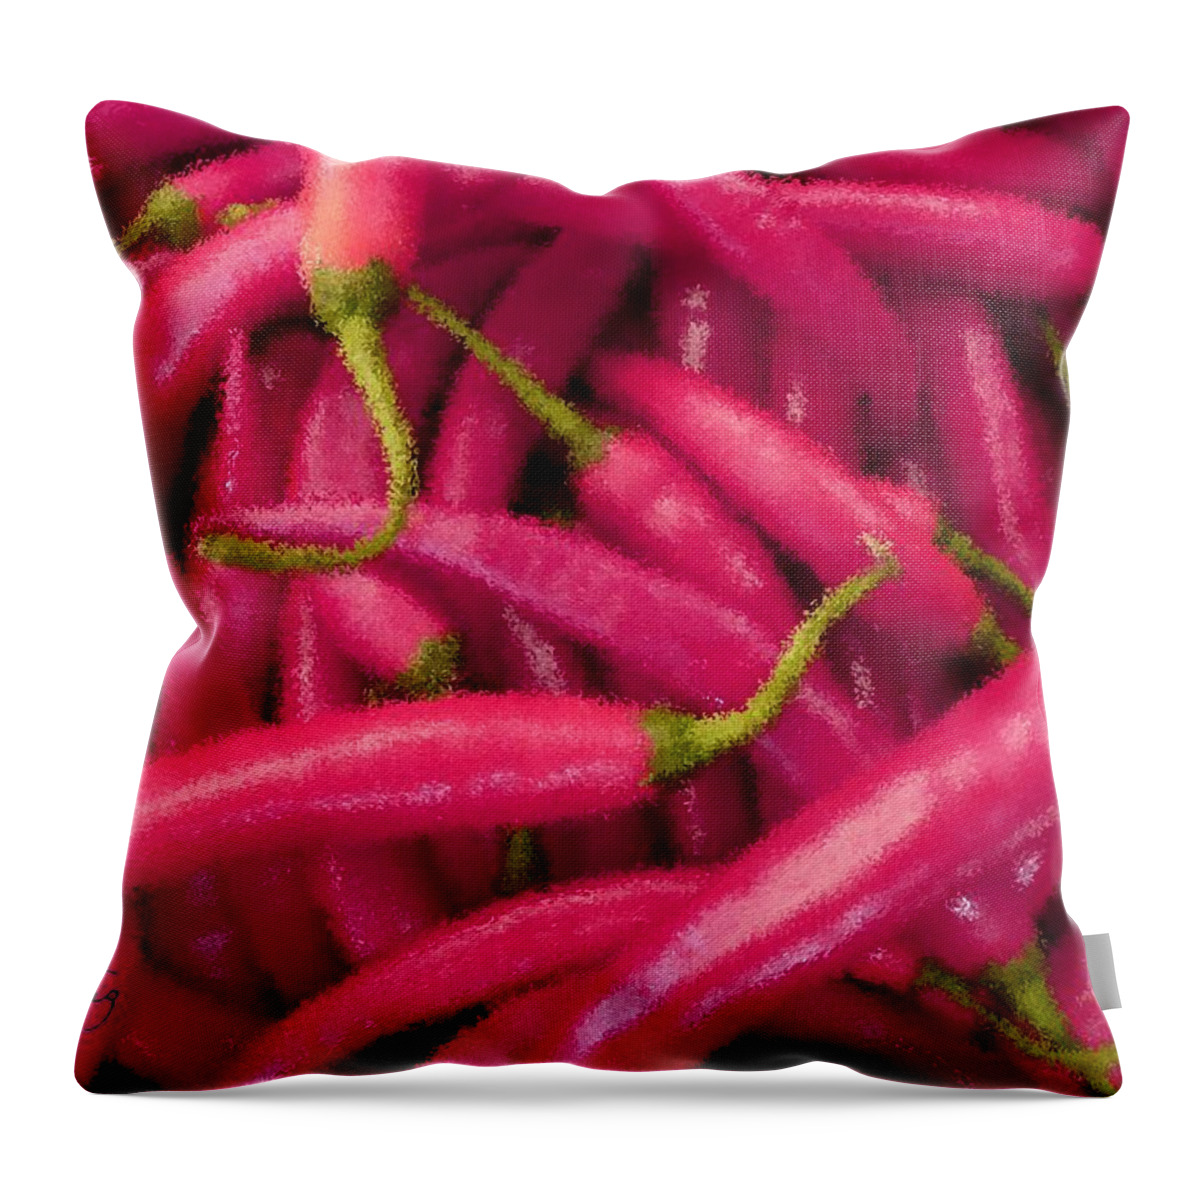 Pink Throw Pillow featuring the painting Pink Chili Peppers by Bruce Nutting